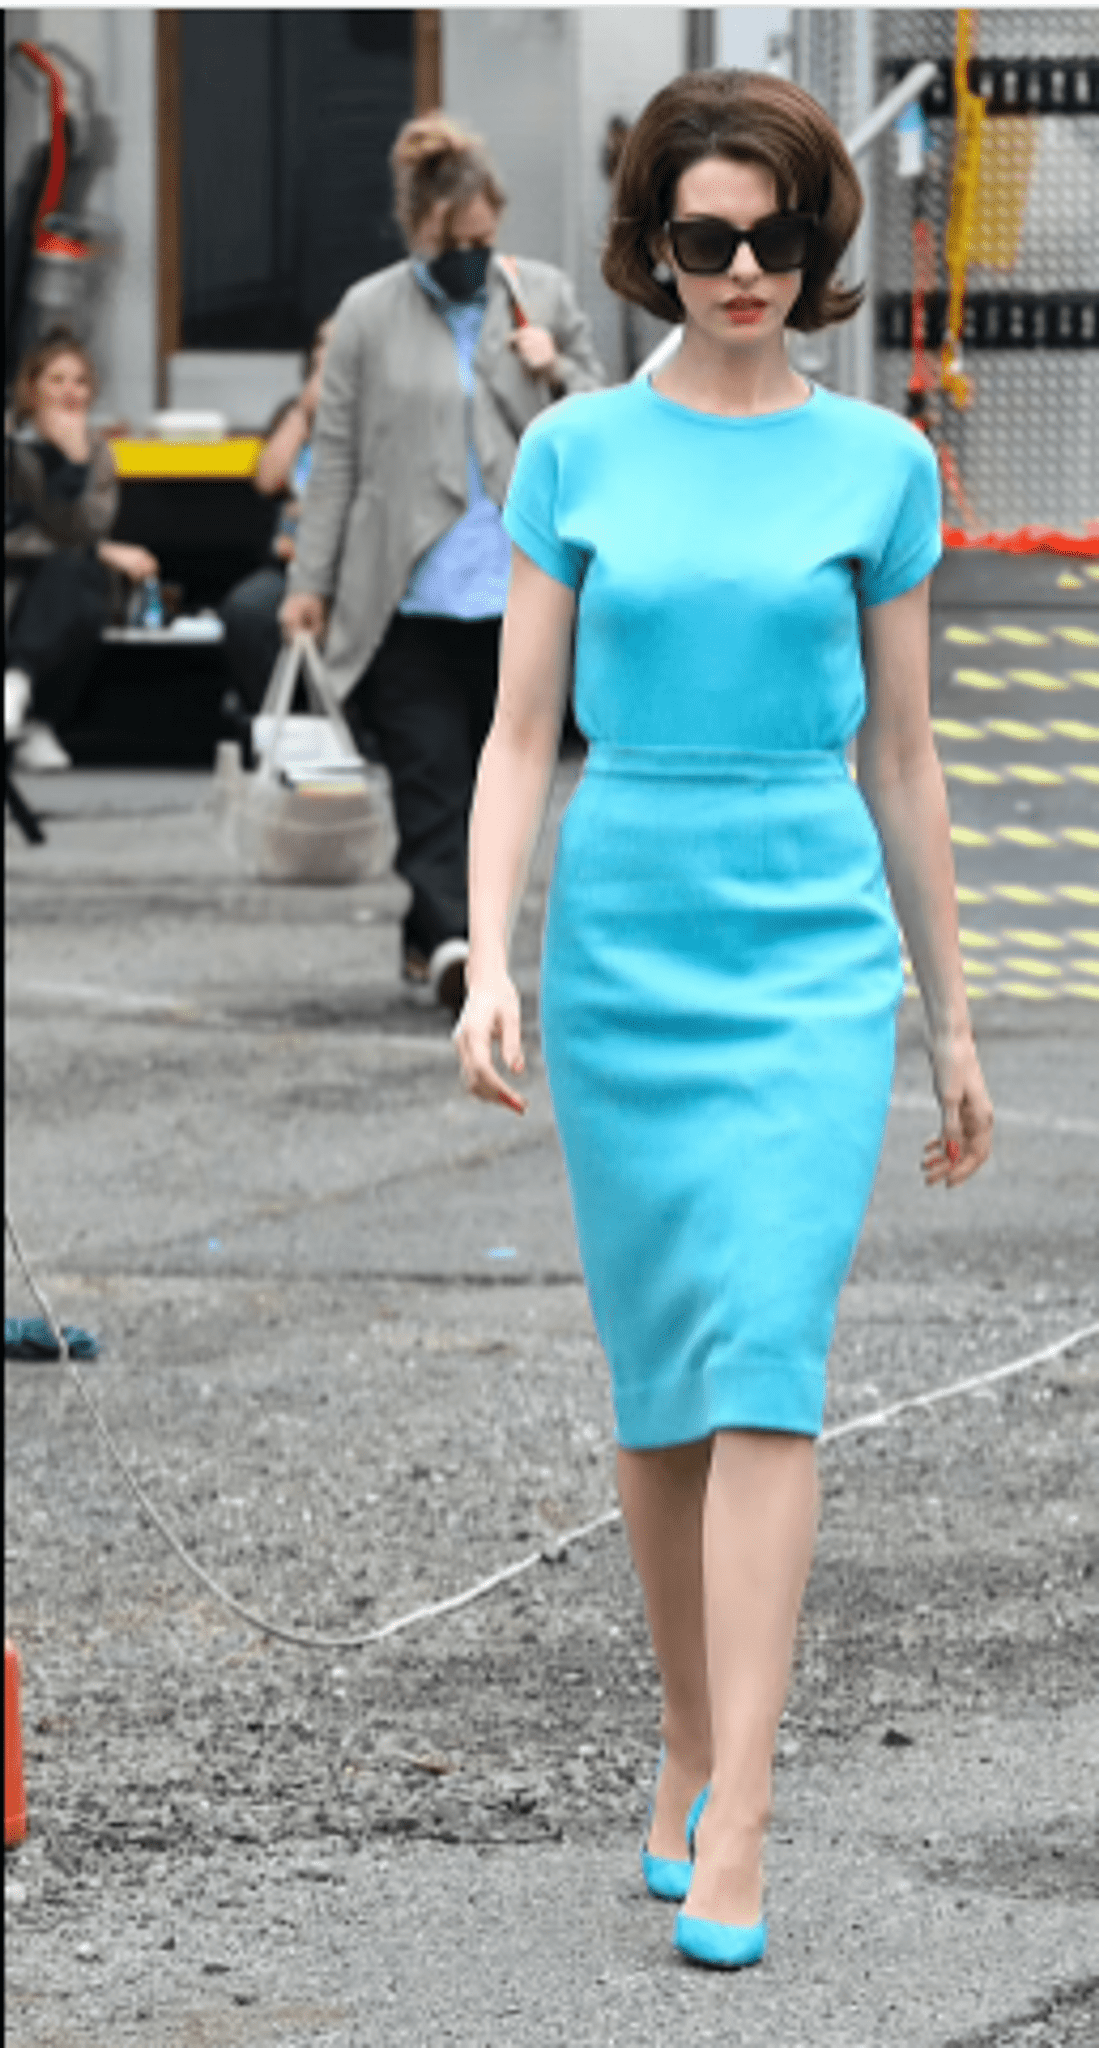 ”the-incomparable-anne-hathaway-changed-three-outfits-in-one-day-on-the-set-of-a-new-film”